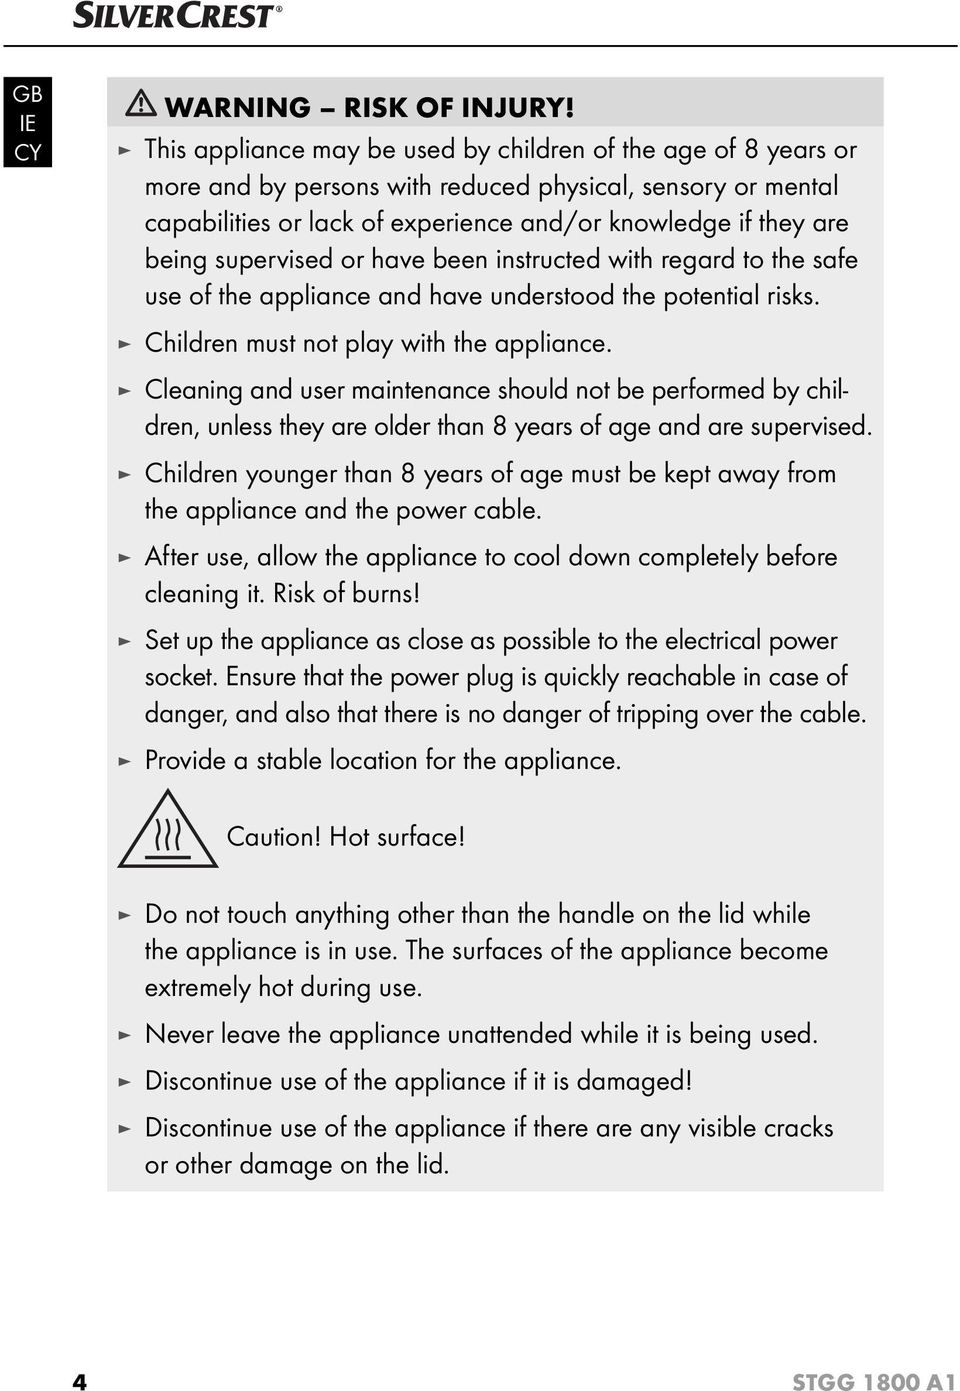 supervised or have been instructed with regard to the safe use of the appliance and have understood the potential risks. Children must not play with the appliance.